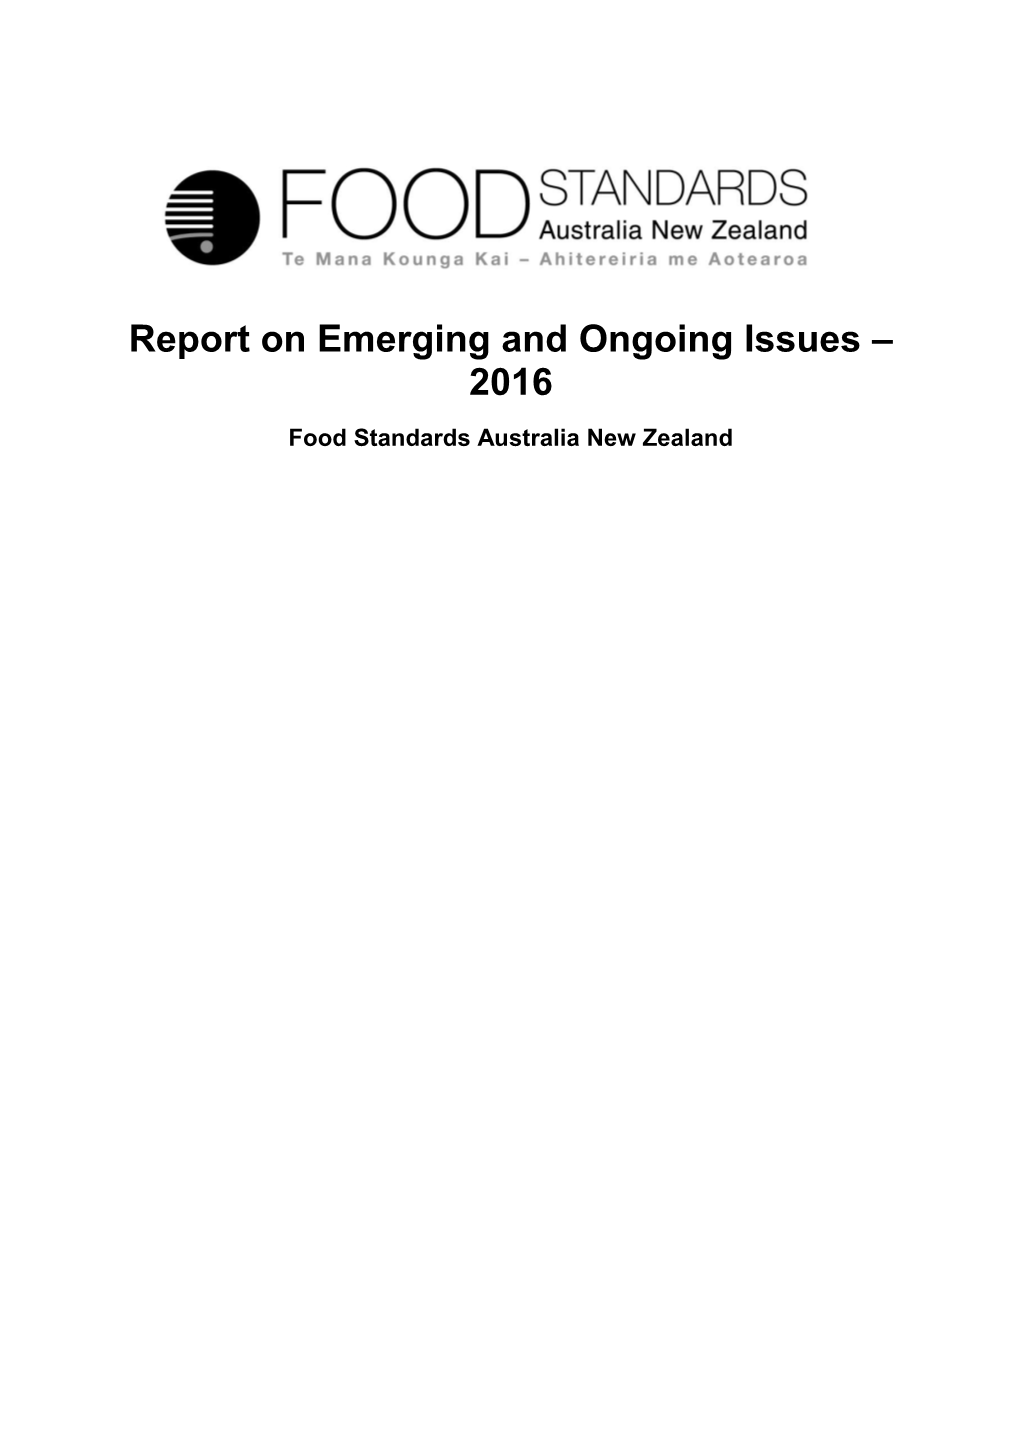 Report on Emerging Issues - 2016